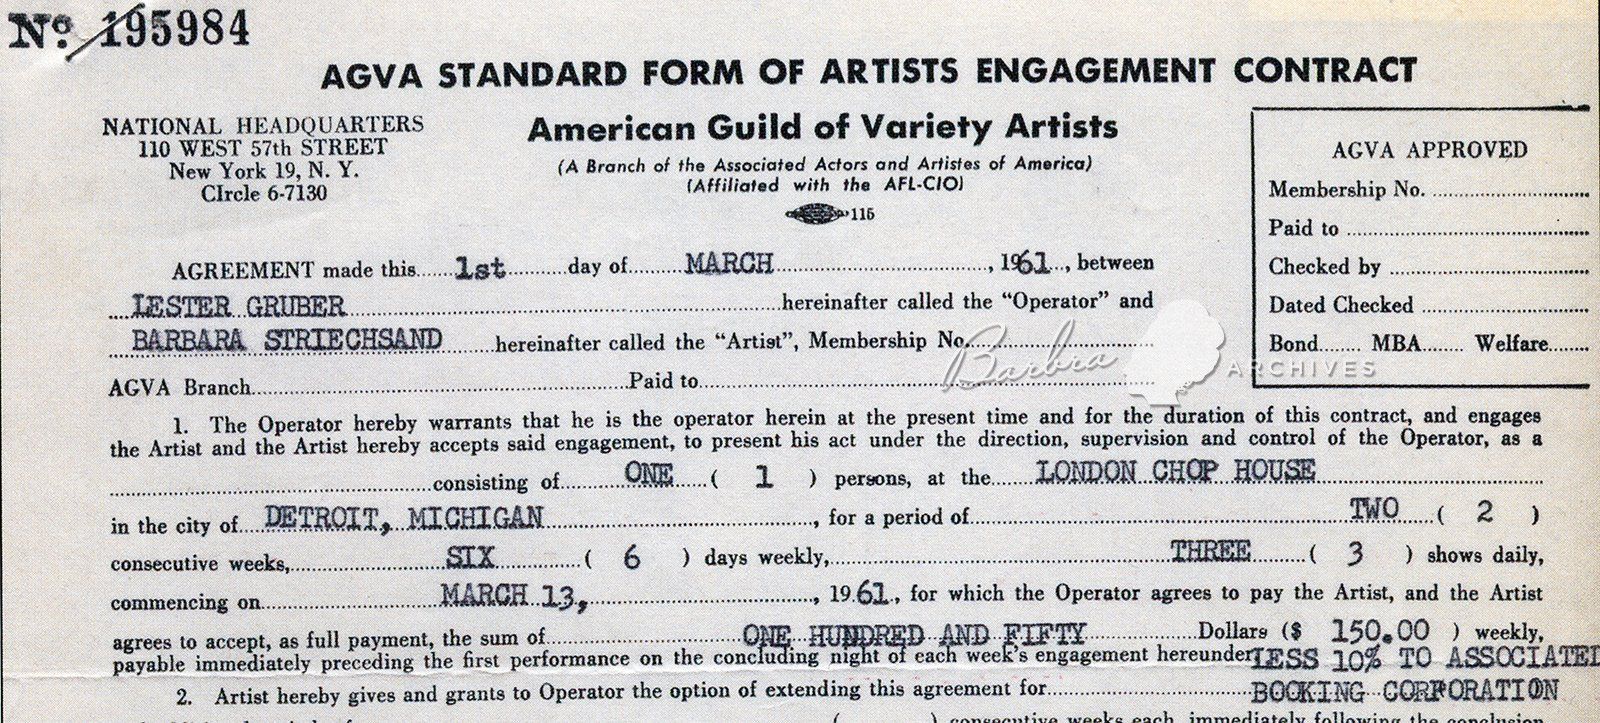 Close Up of AGVA contract between the Caucus Club and Barbra Streisand in 1961